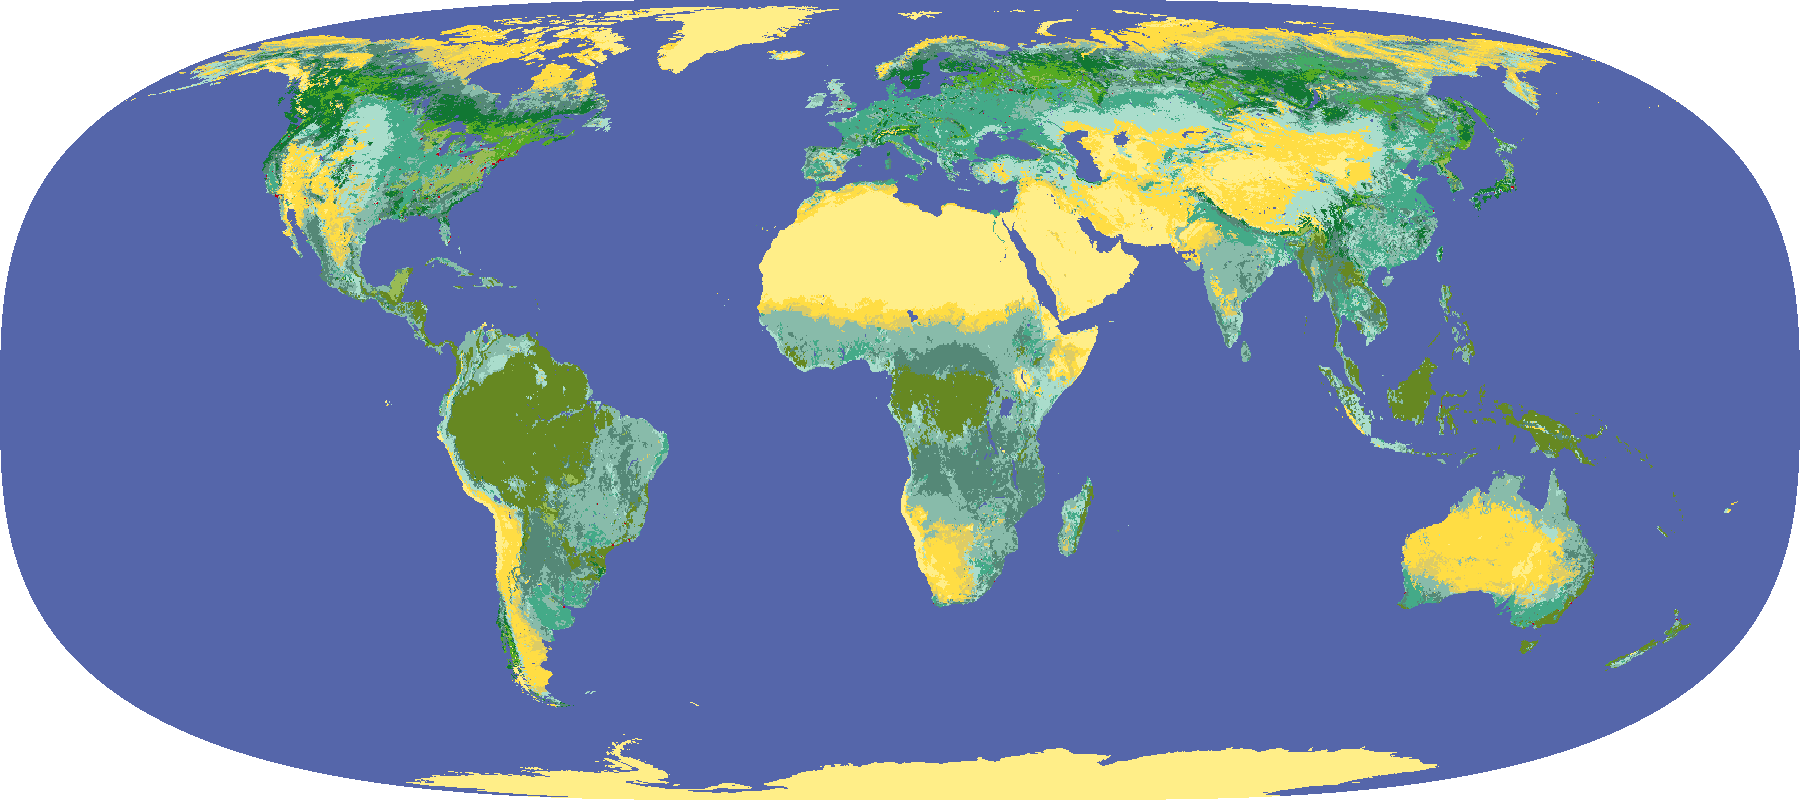 Global land cover classification